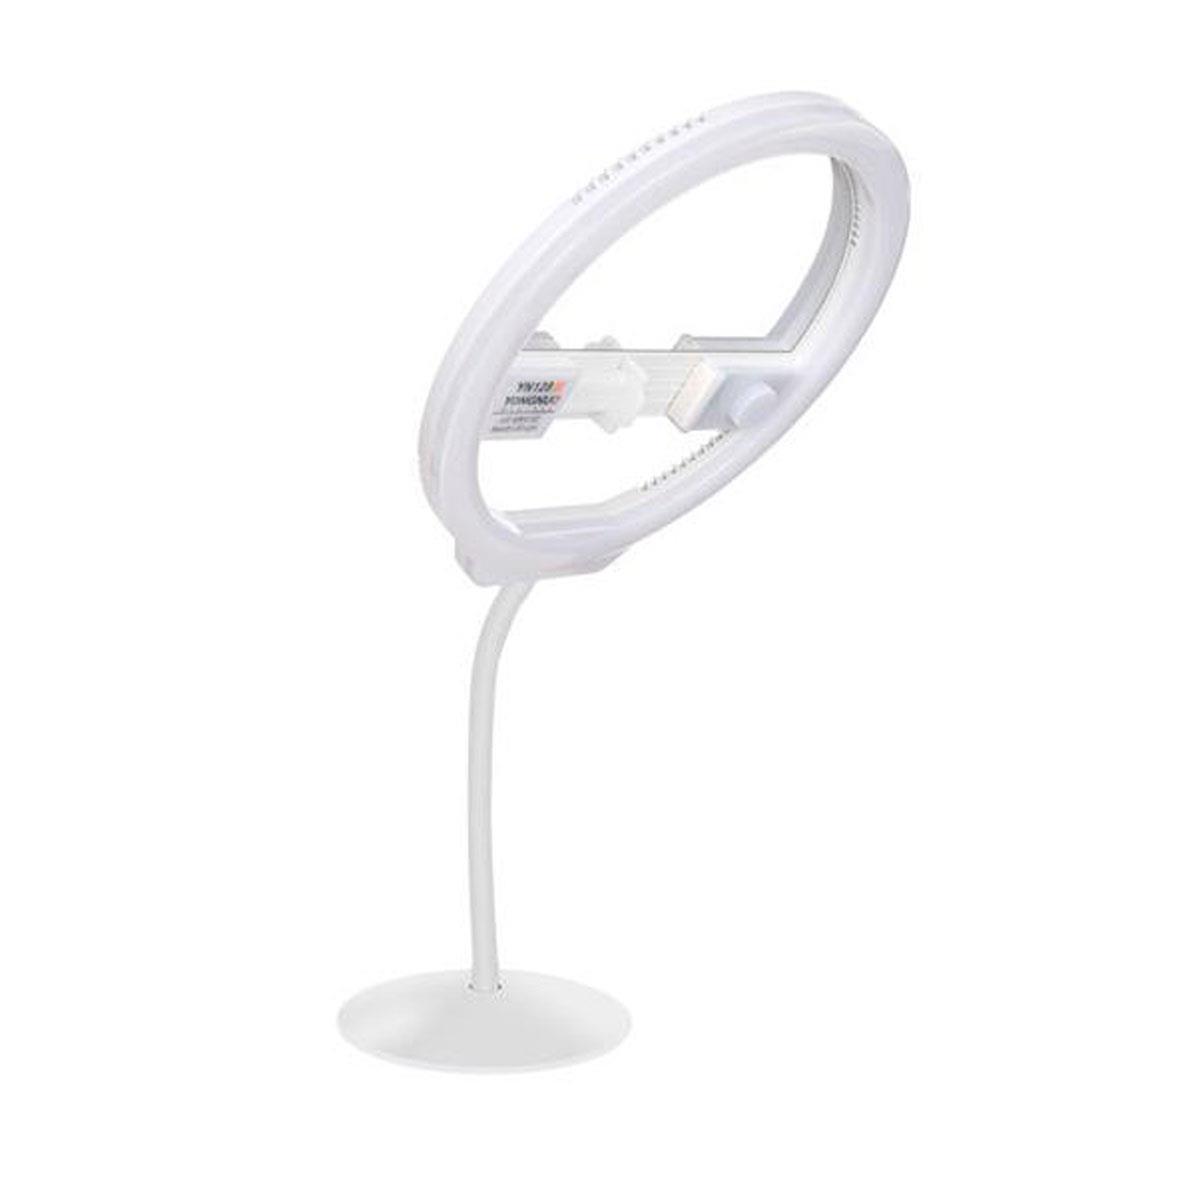 Image of Yongnuo YN128 II Portable LED Beauty Light with Integrated Cosmetic Mirror